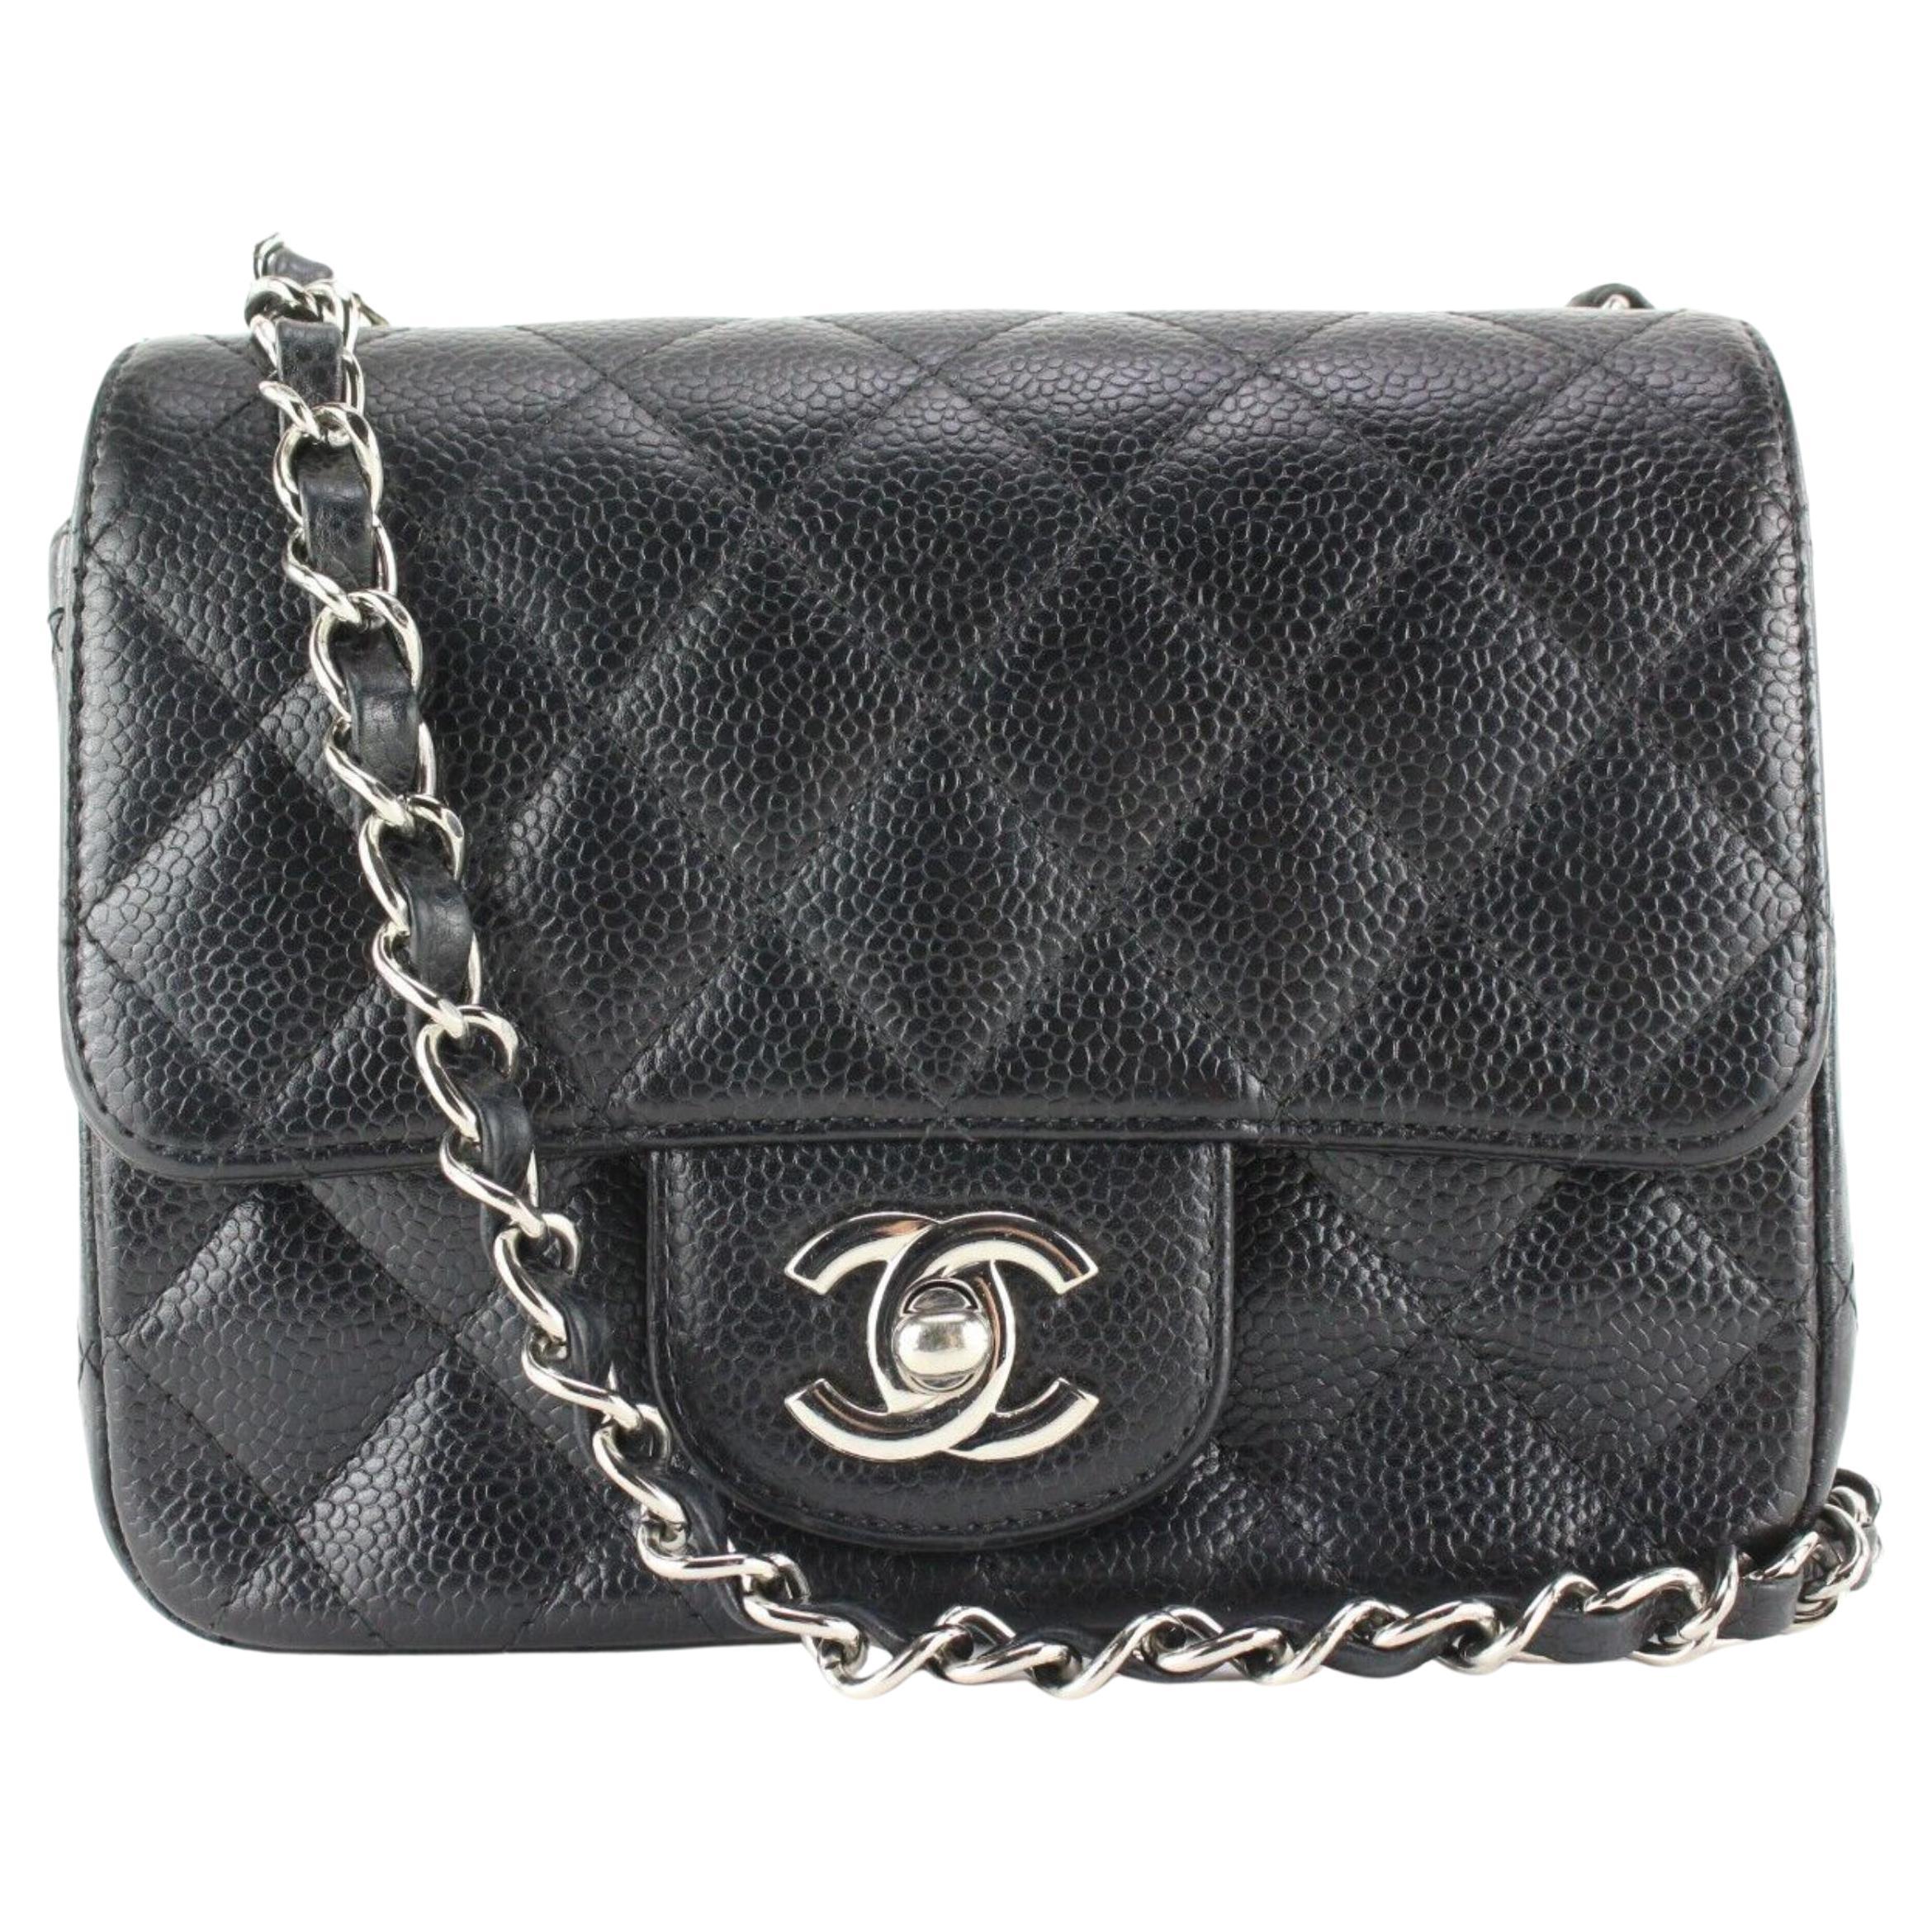 Chanel Black Quilted Caviar Leather Mini Square Classic Flap SHW RARE 19c26a For Sale